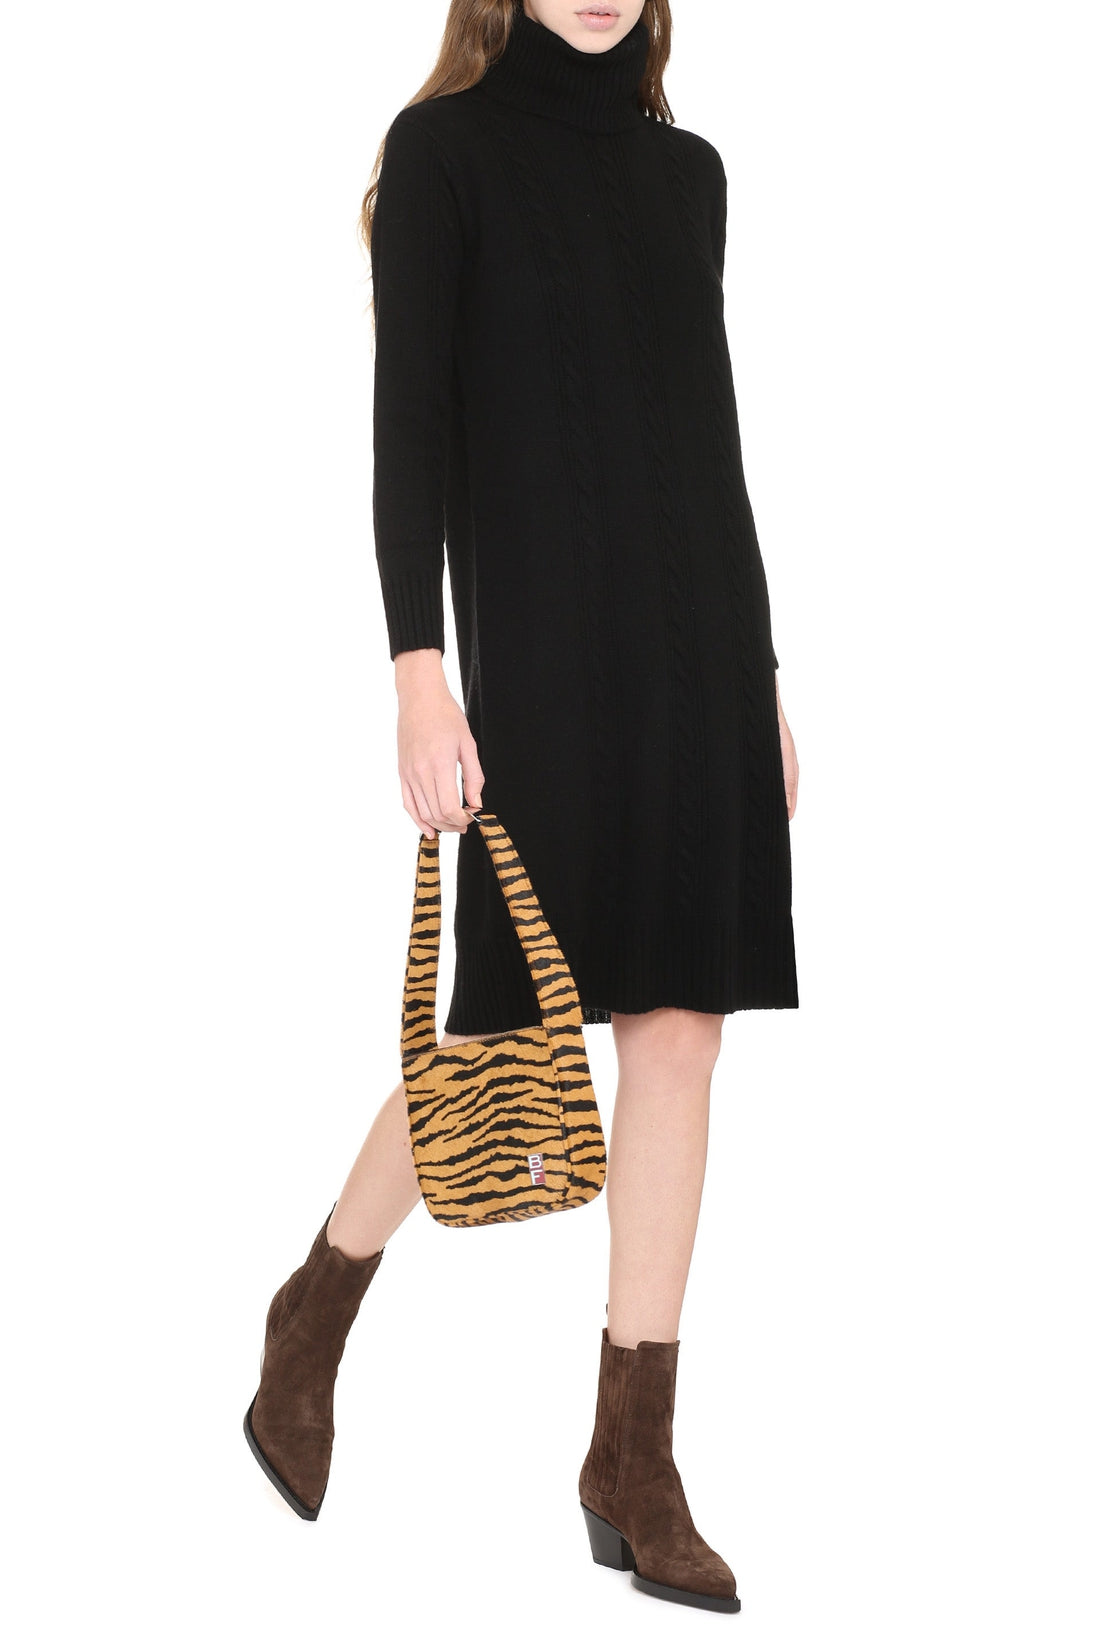 Max Mara Studio-OUTLET-SALE-Paese wool cable knit dress-ARCHIVIST